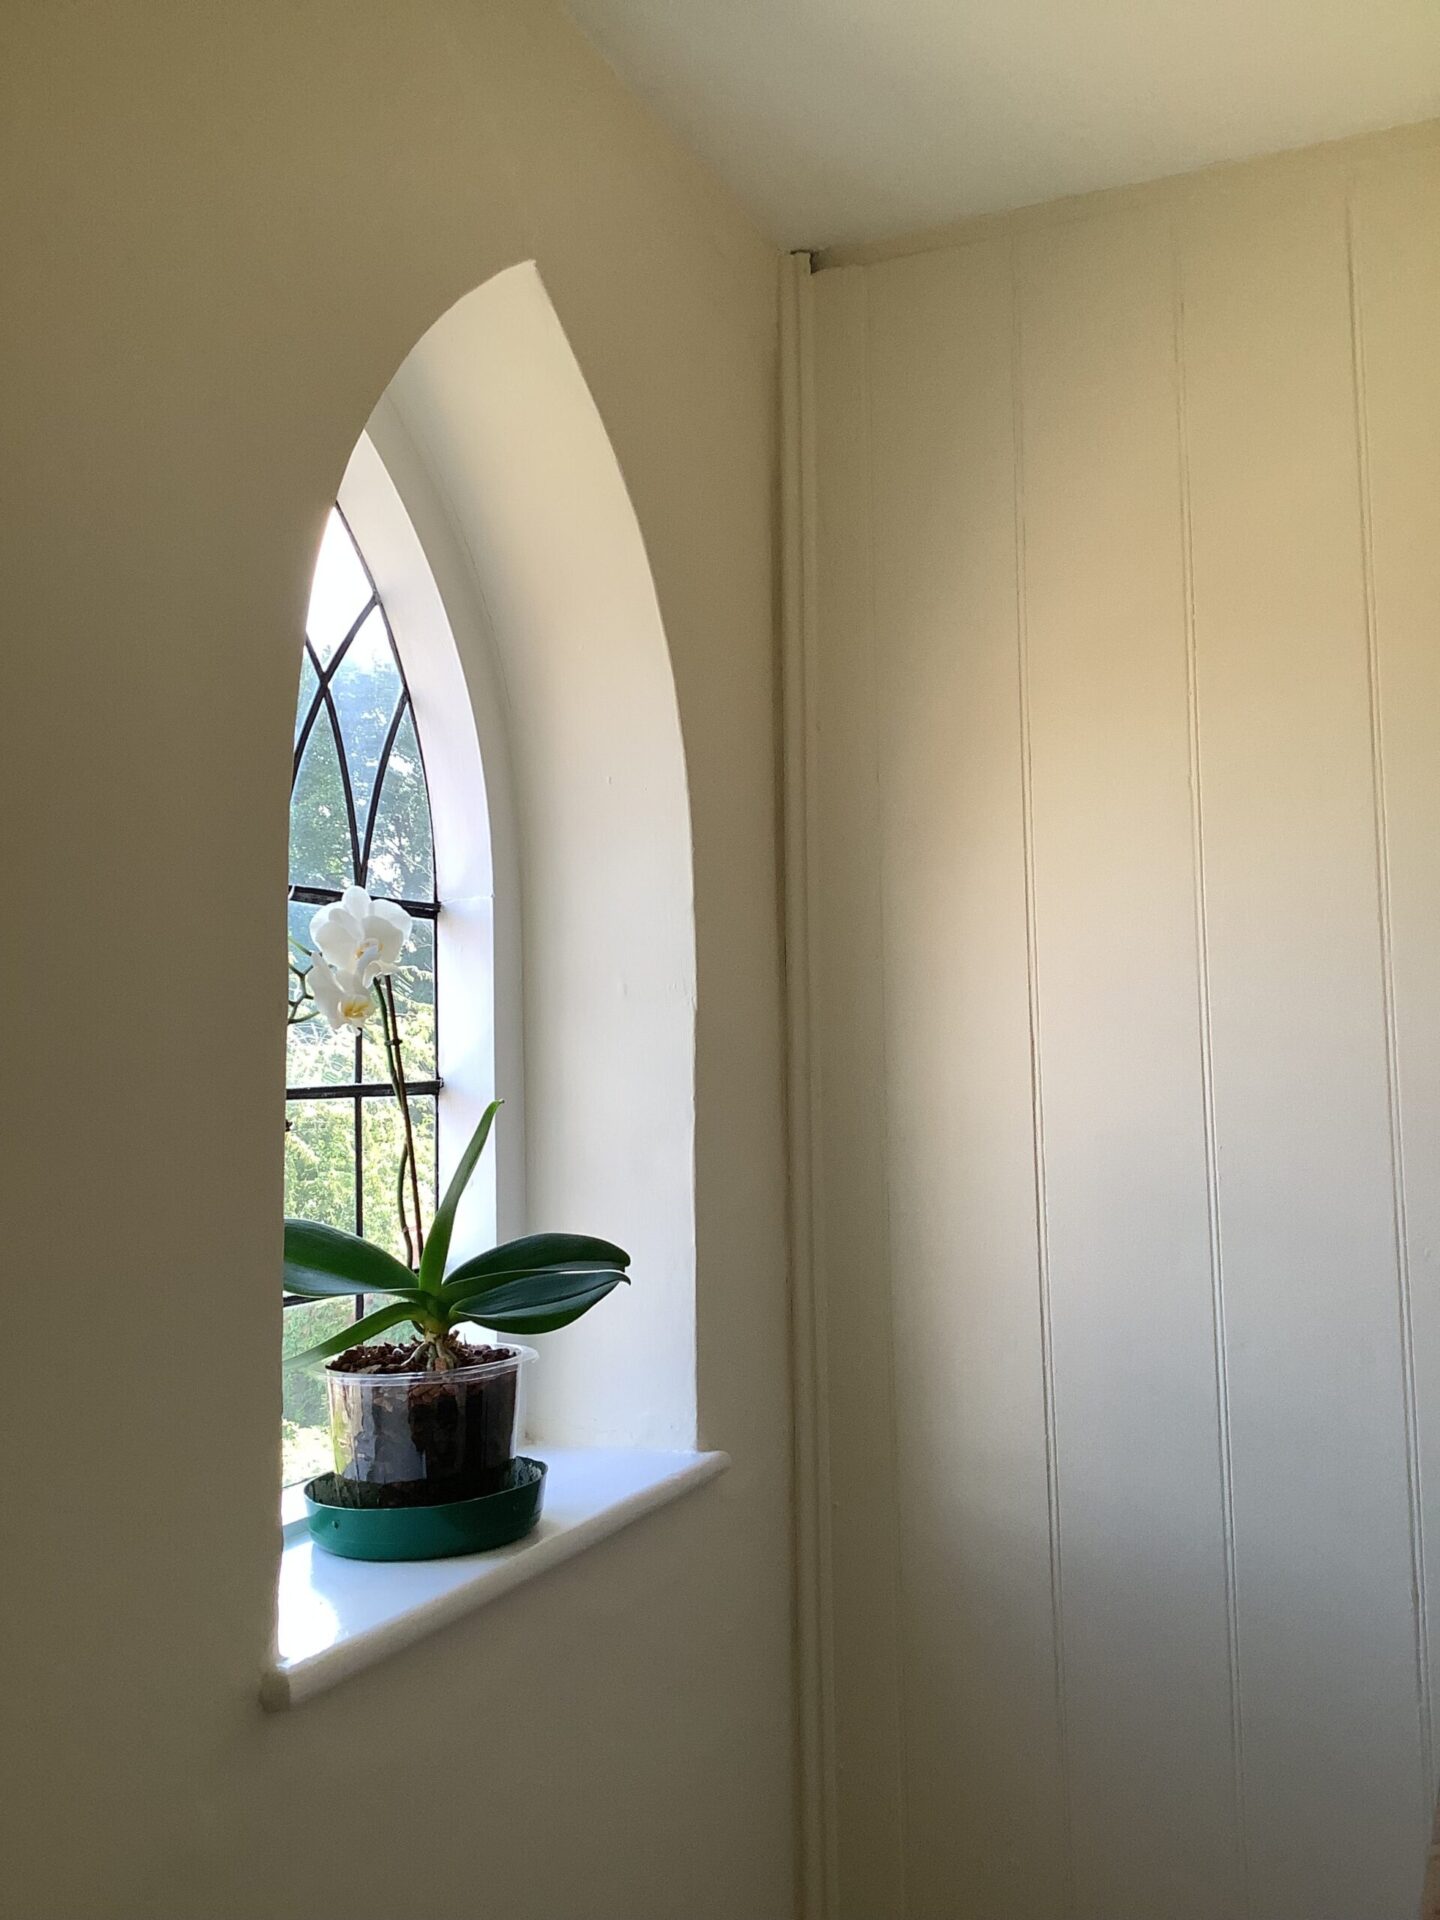 Inside window view of arched and crossed church like windows with flower